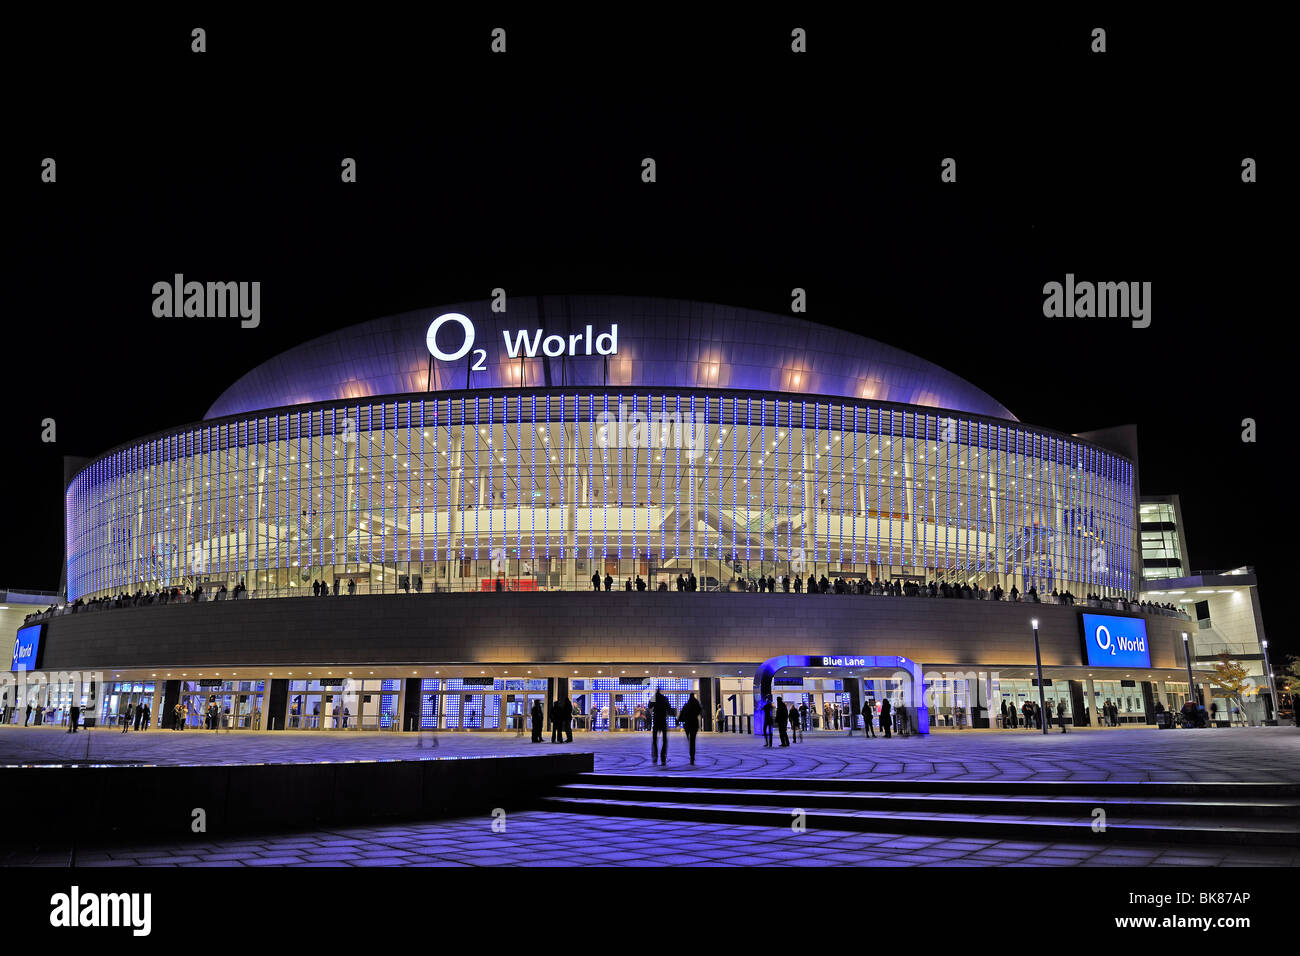 O2 World, a multi-purpose indoor arena for up to 17000 spectators, night scene, Berlin, Germany, Europe Stock Photo